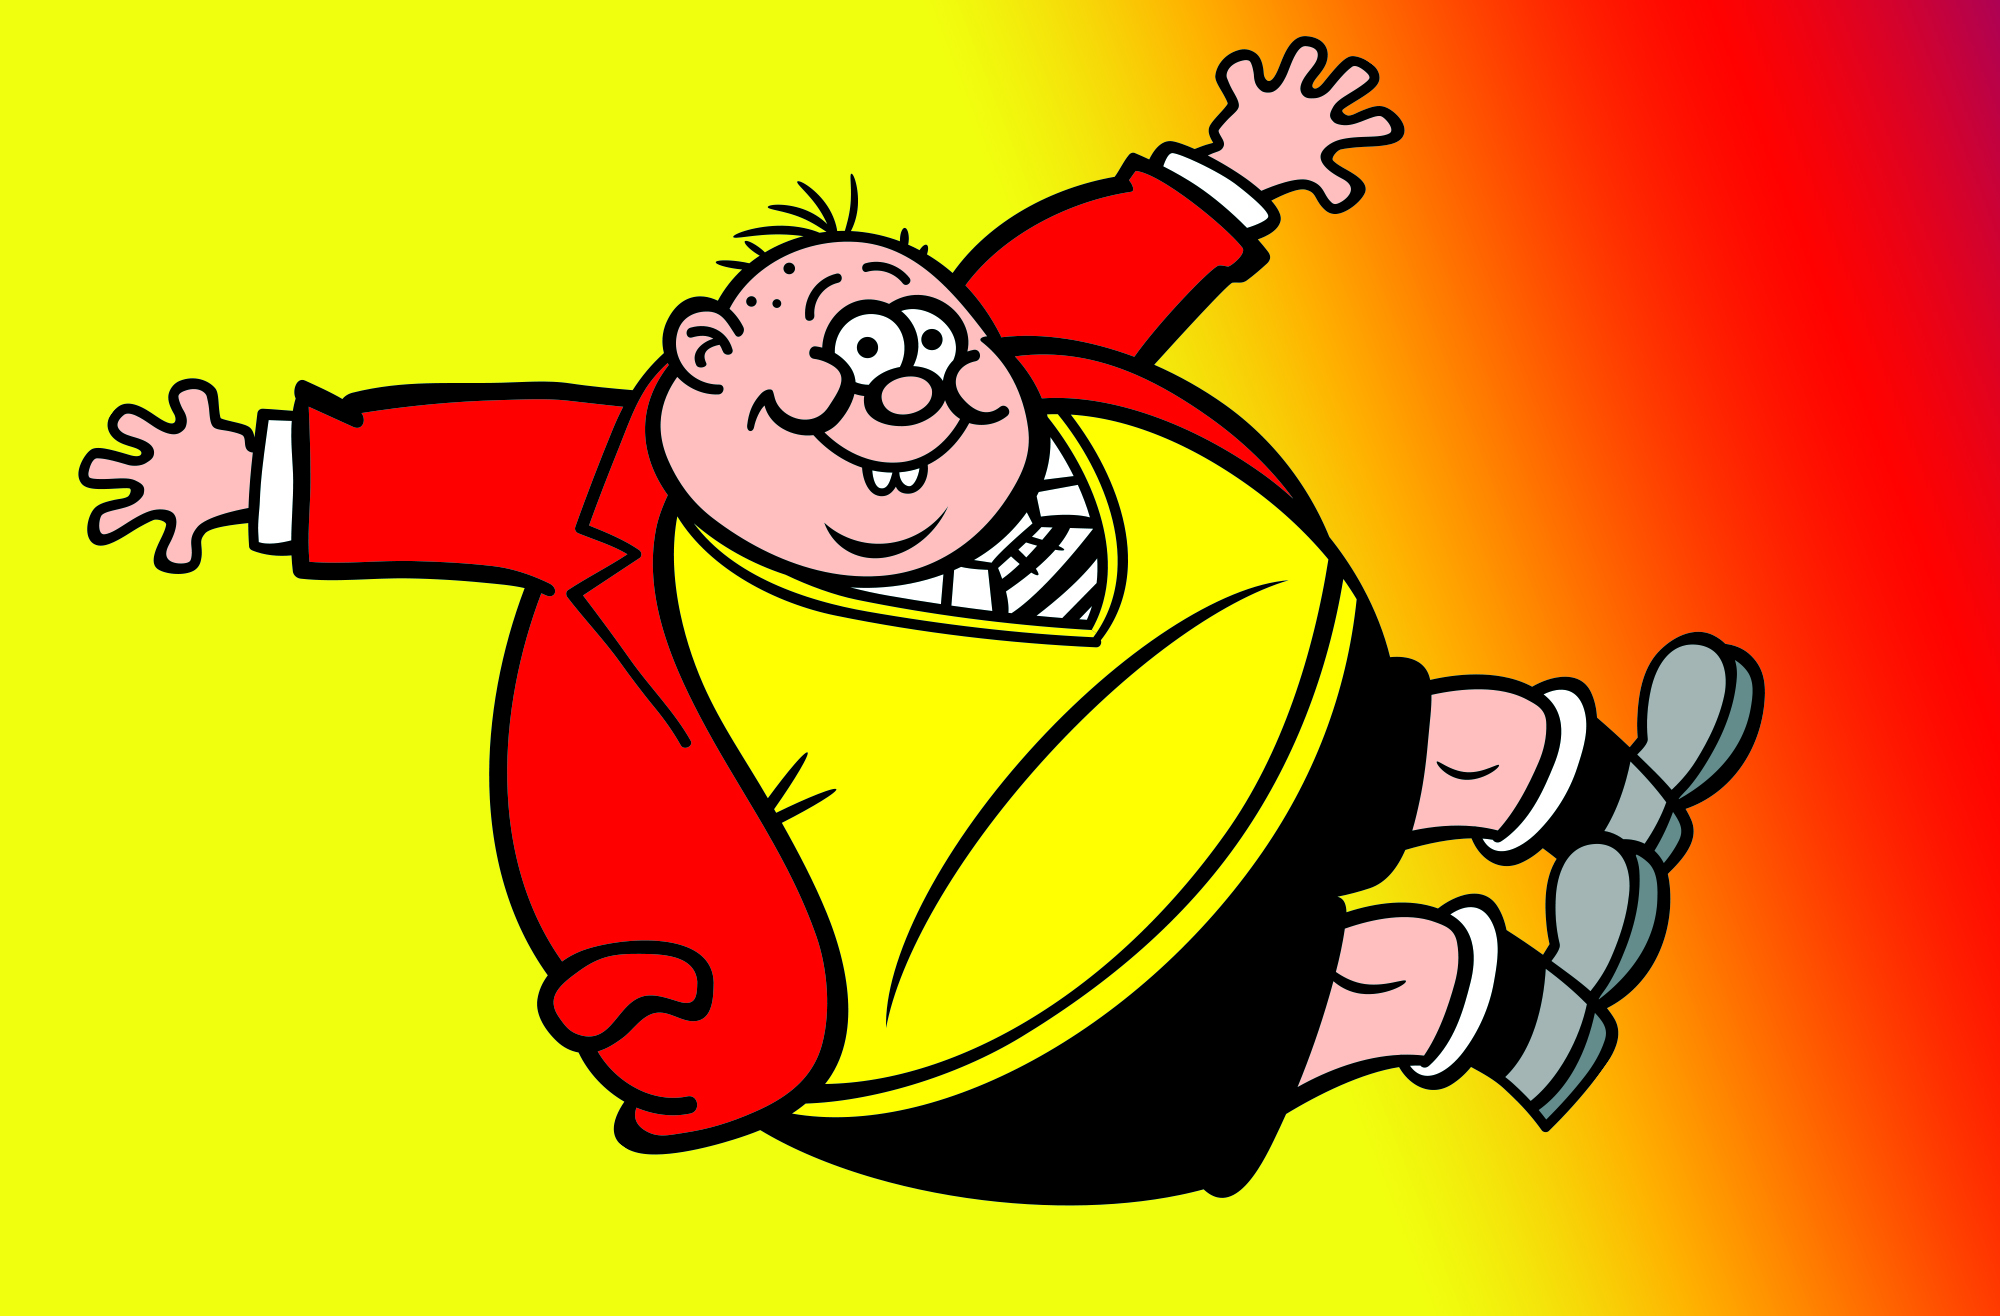 Fatty from the Bash Street Kids